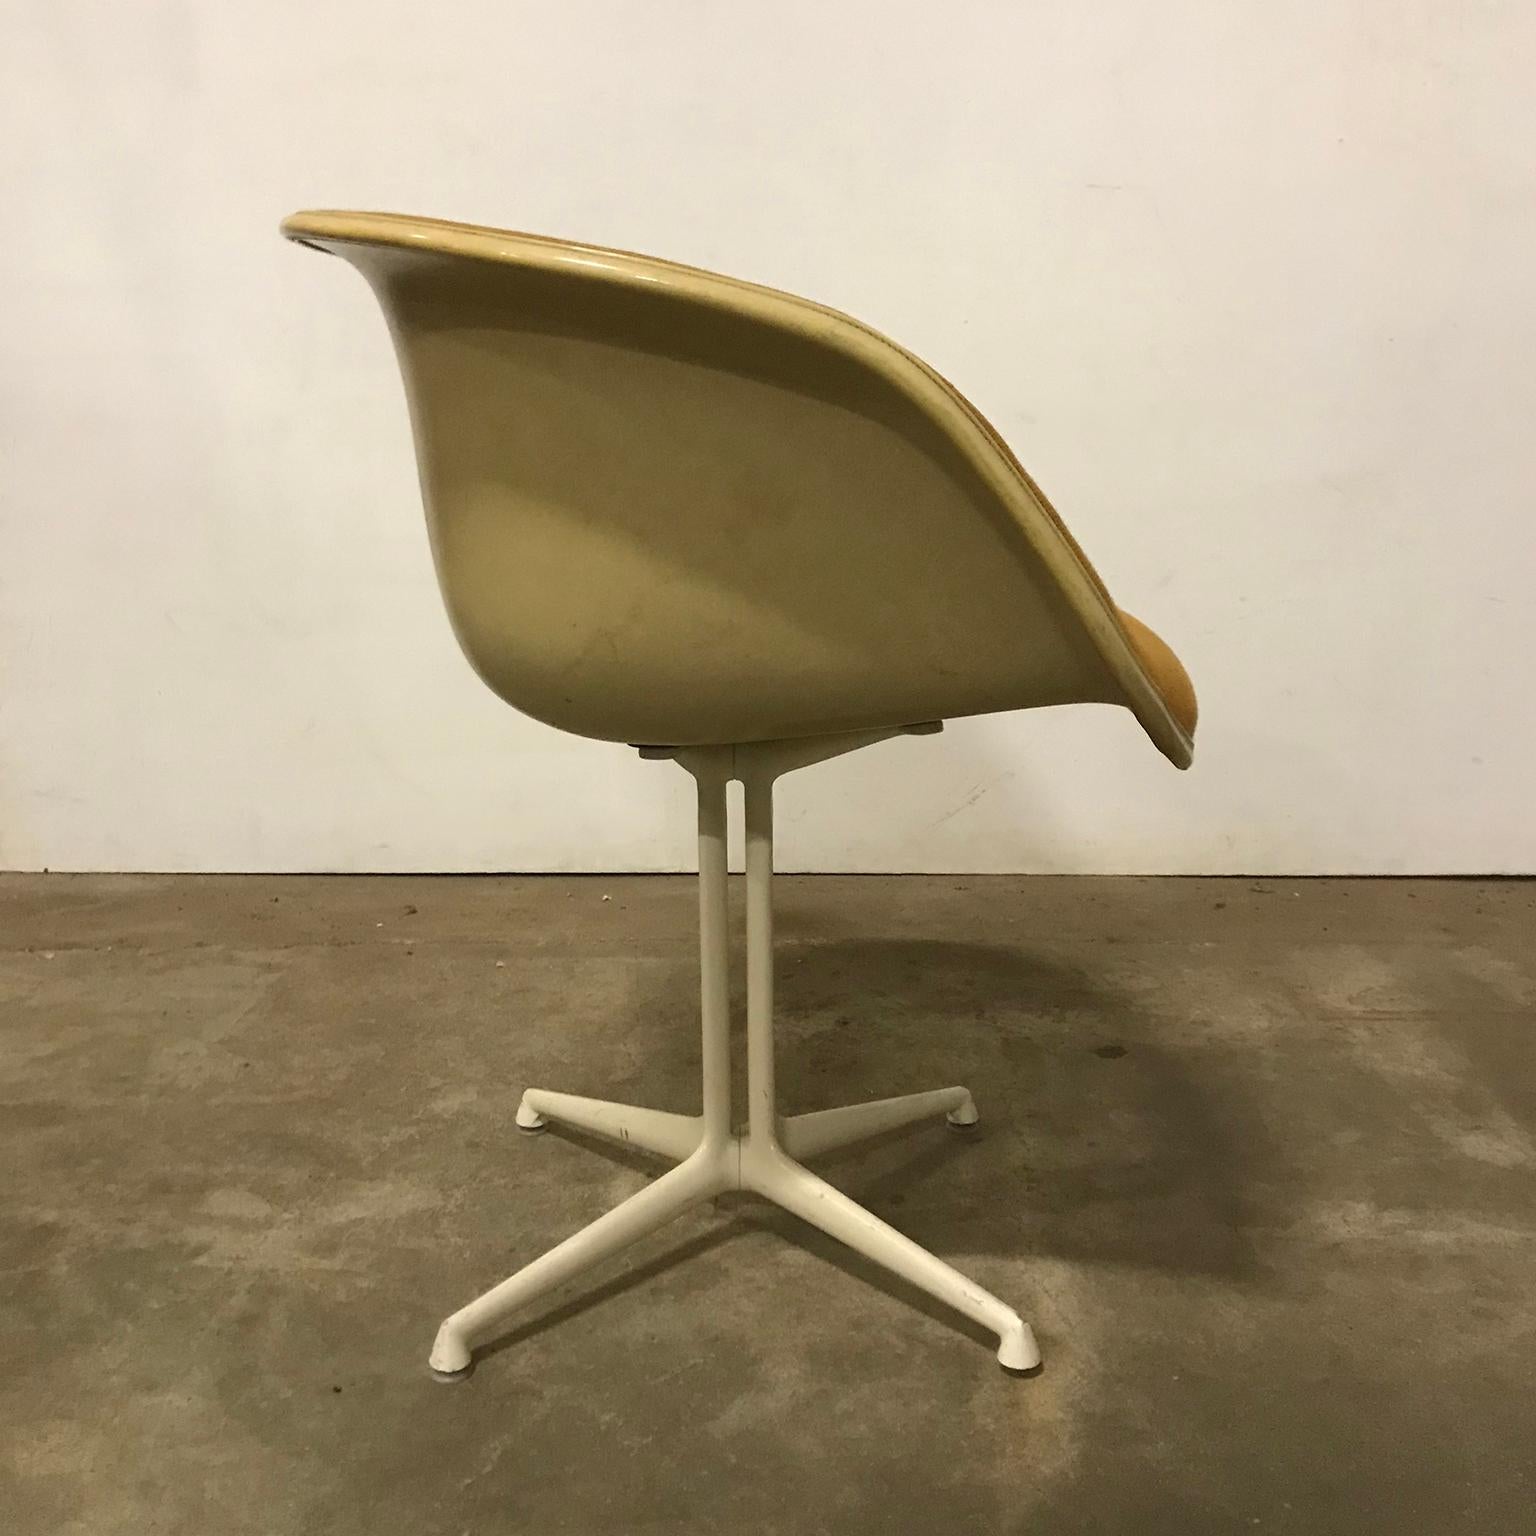 American 1960, Ray and Charles Eames, Original La Fonda Chairs by Miller in First Fabric For Sale